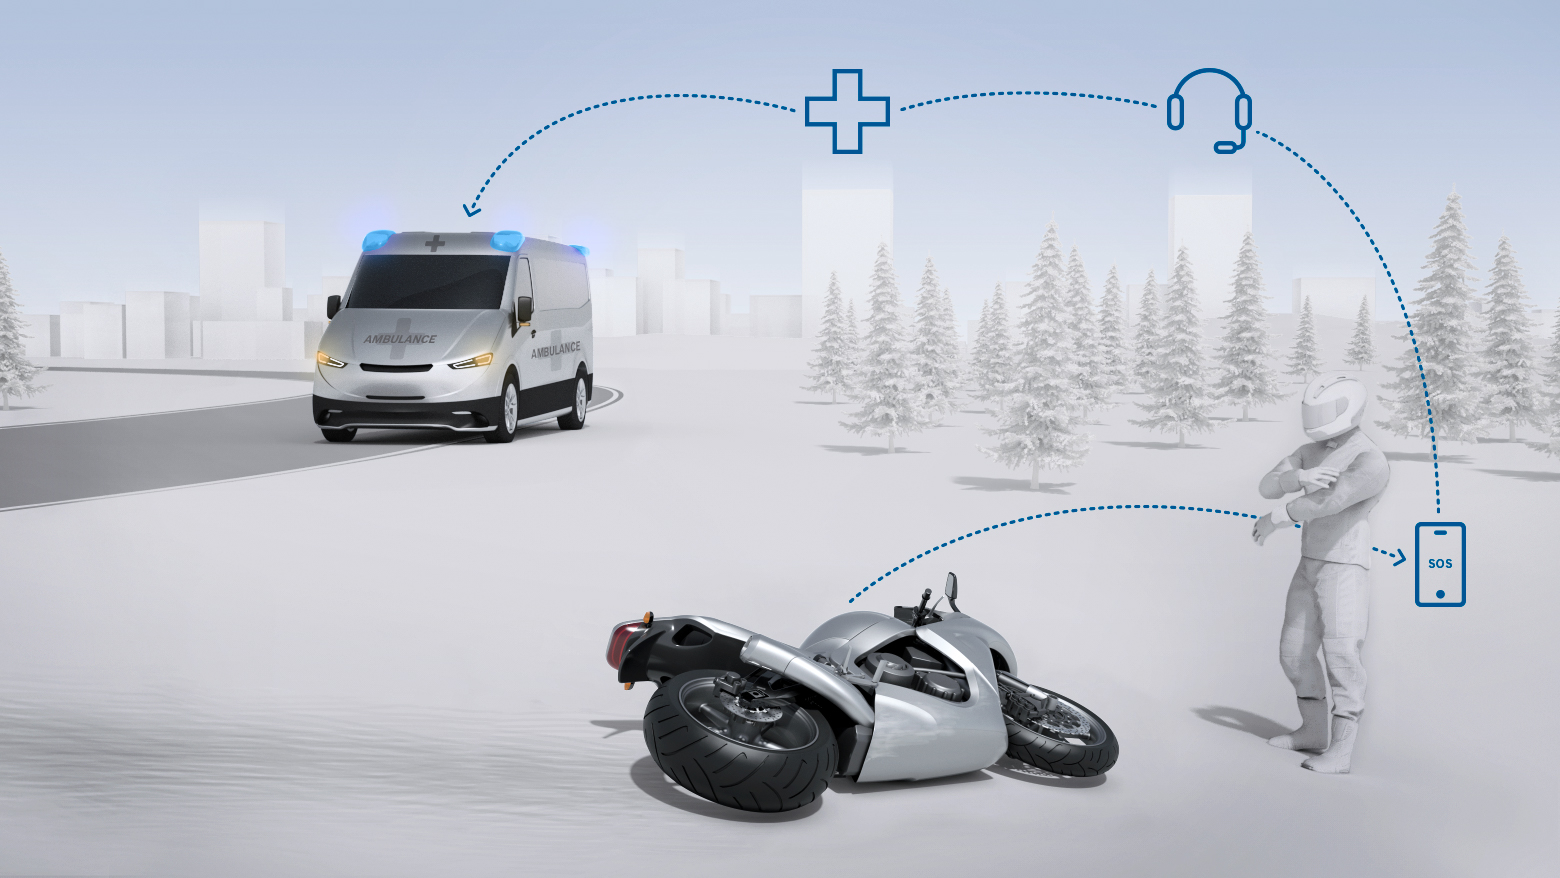 Help Connect combines automatic accident detection, emergency call function, and personal emergency response system